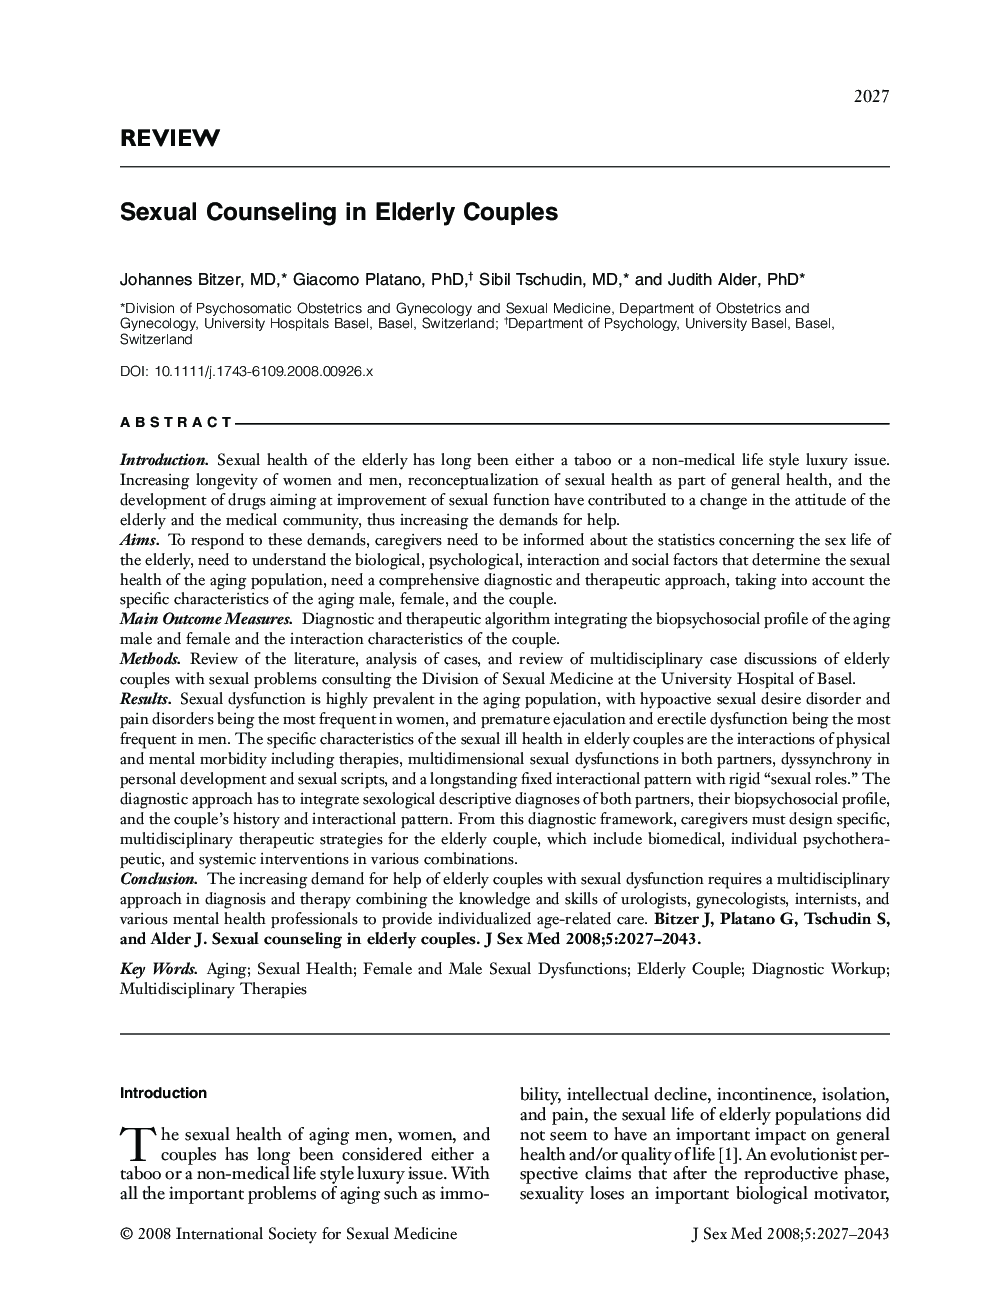 Sexual Counseling in Elderly Couples